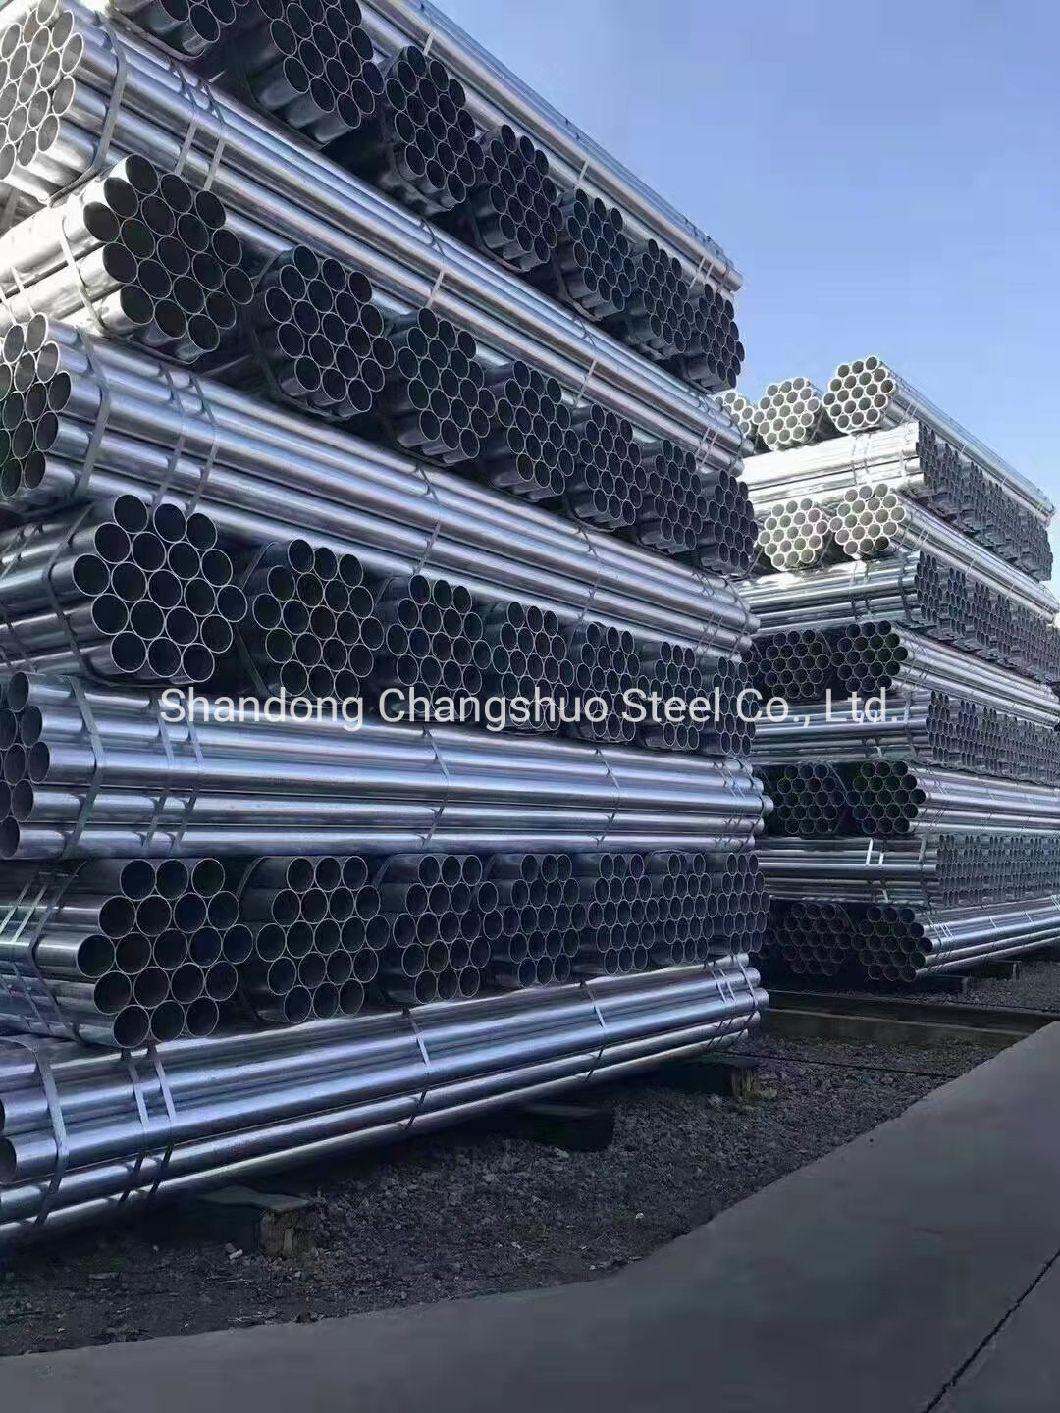 Stainless Steel Manufactures Welded Polished Stainless Steel Tube 304 Pipe